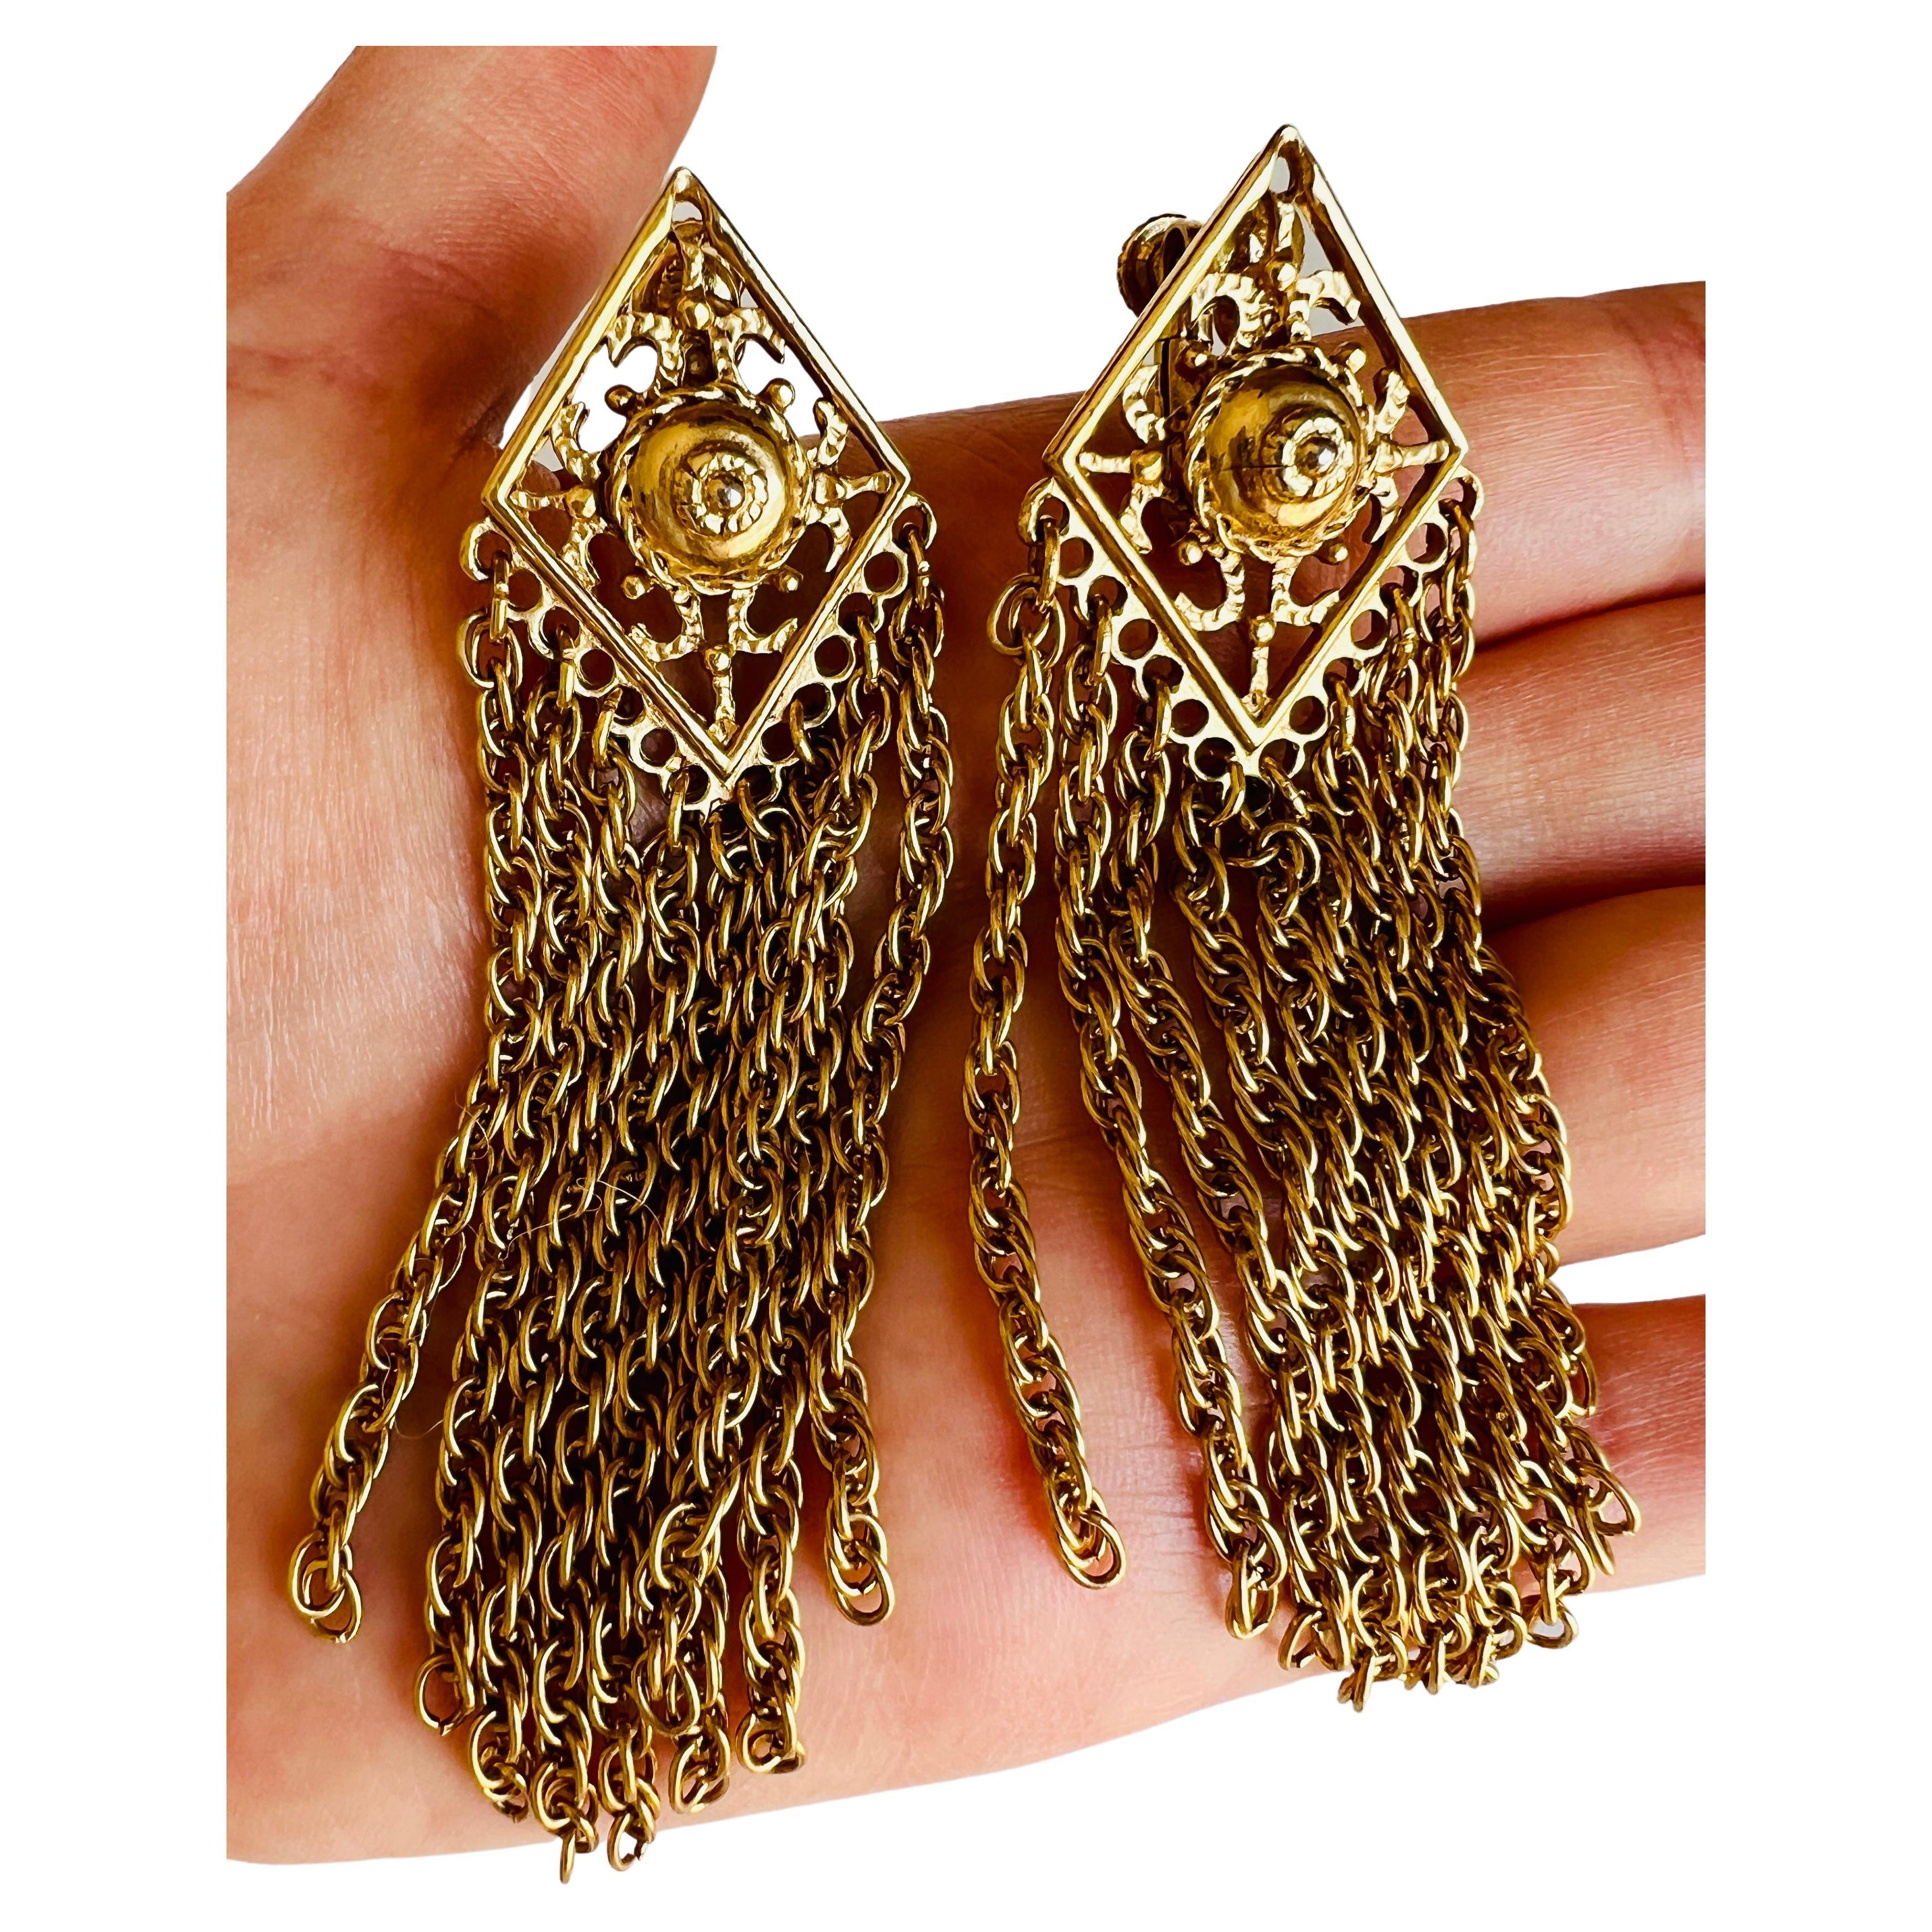 Stylish pair of gold plated chain tassel dangle earrings with adjustable clip backs. 

Size: Slight difference in length (1/4